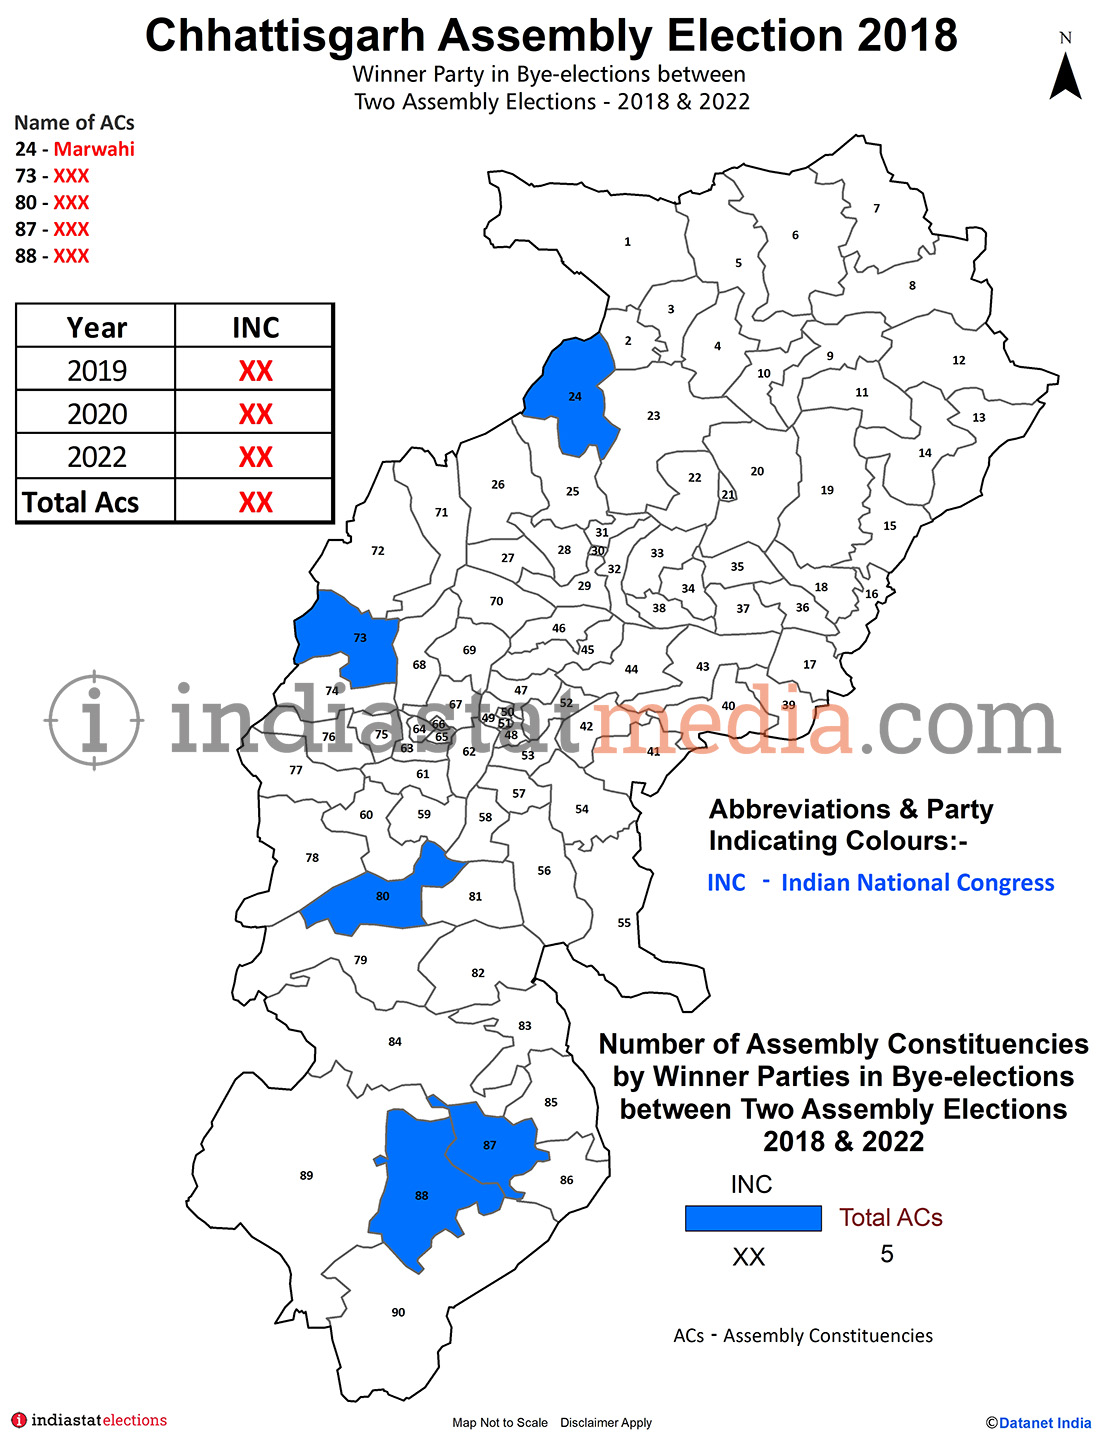 Winner Parties in Bye-elections between Two Assembly Elections in Chhattisgarh (2018 & 2022)